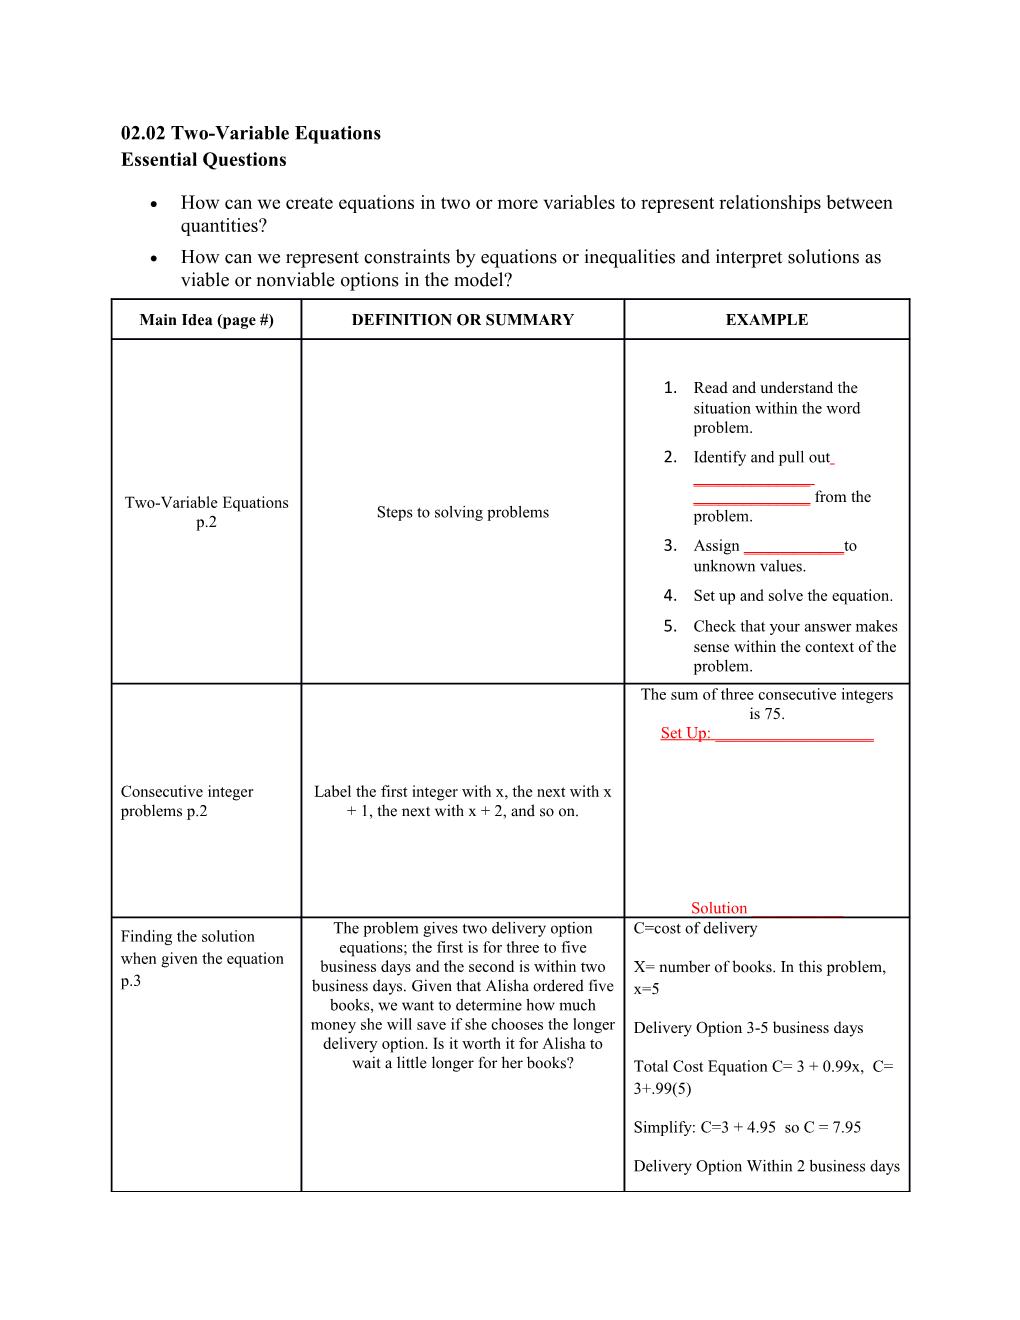 02.02 Two-Variable Equations Essential Questions